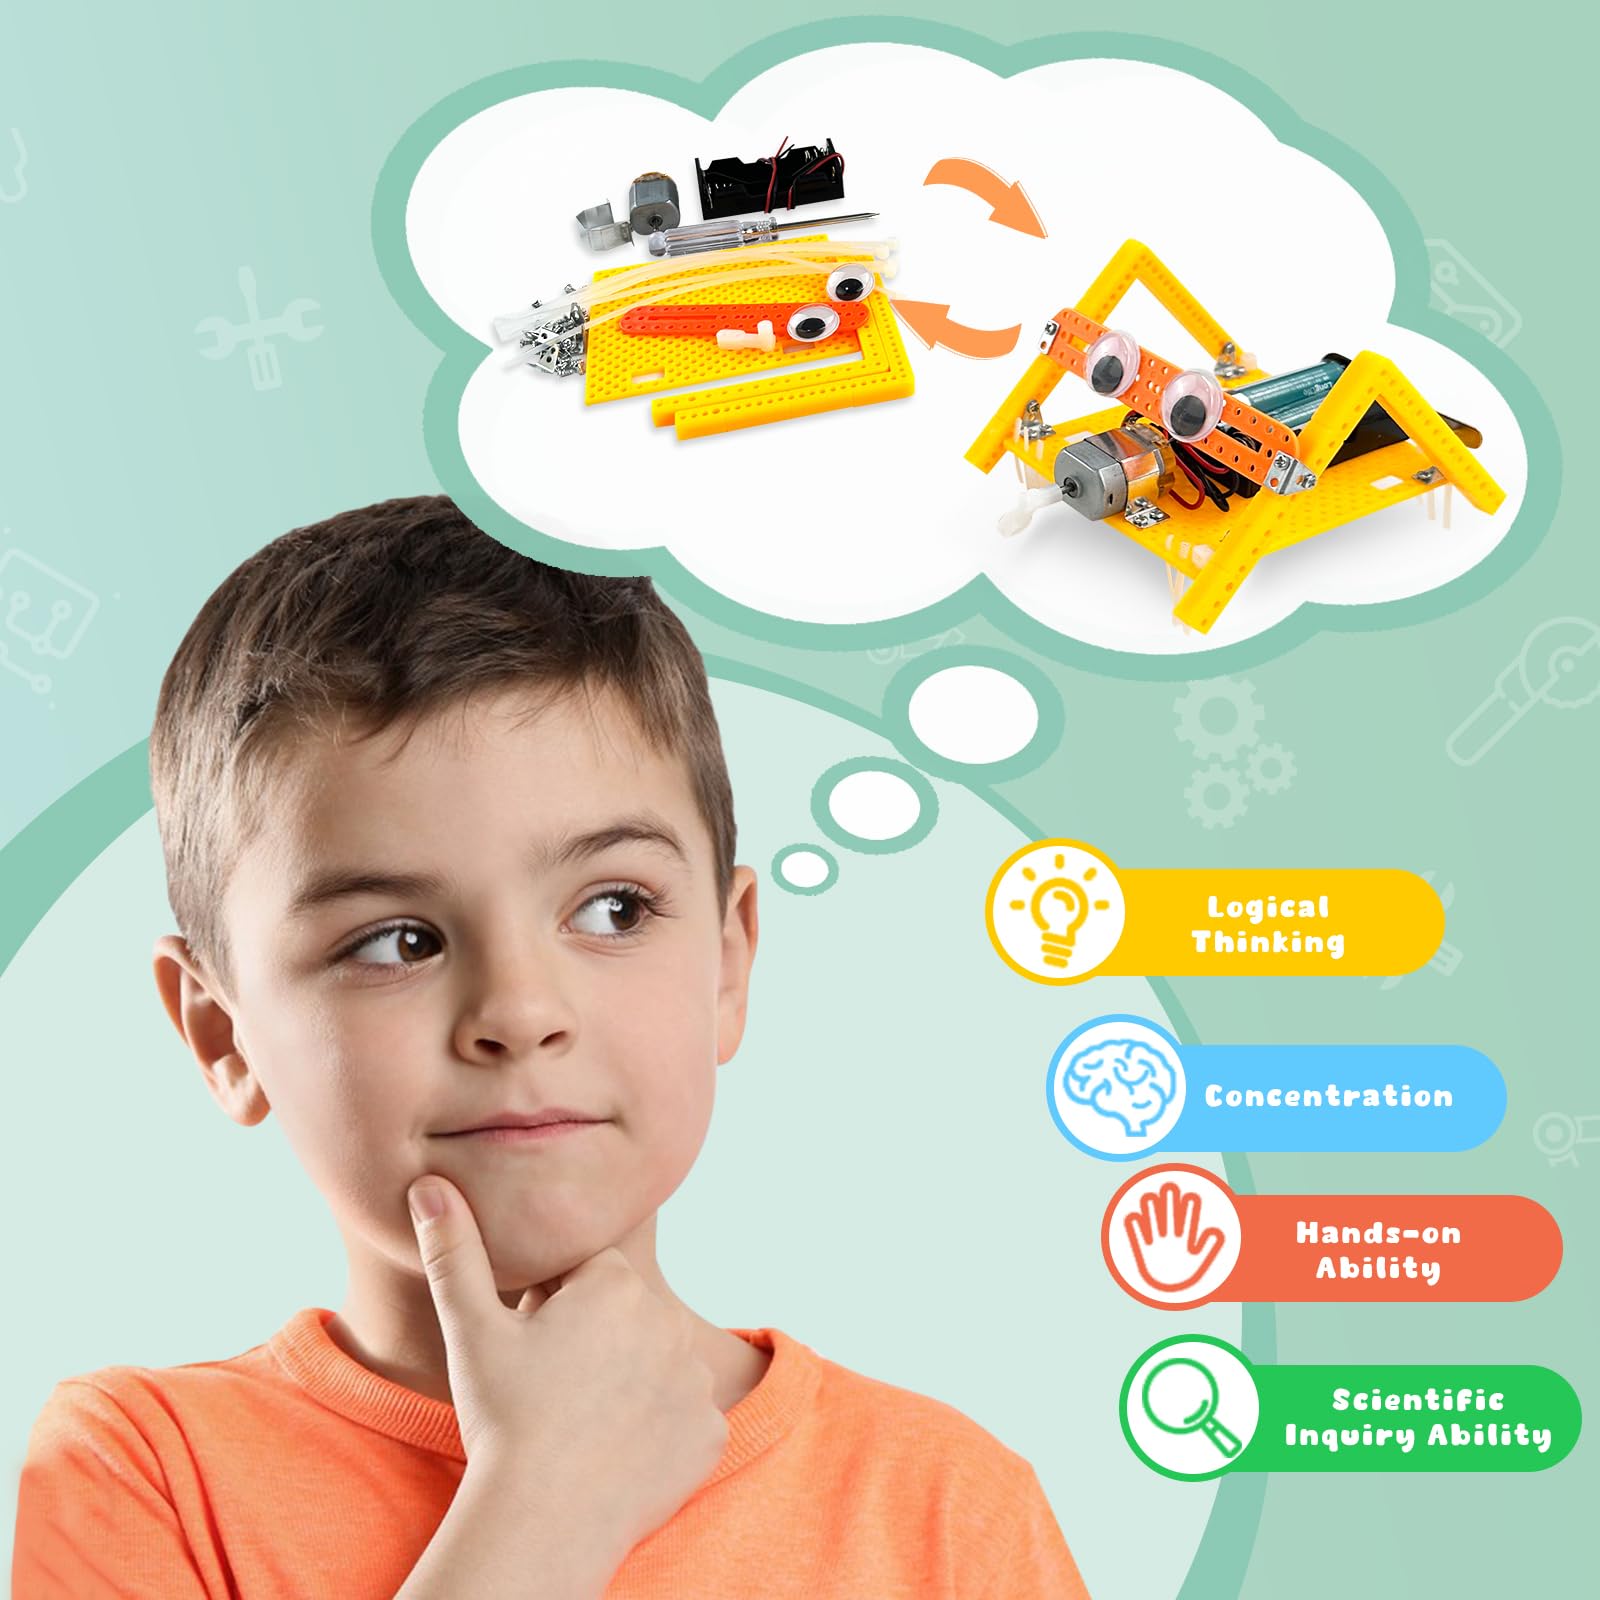 Ailiaili 6 Set STEM Projects for Kids Ages 8-12, Electronic Science Kits for Boys 6-8, DIY Engineering Robotic Stem Toy, Science Experiments Circuit Building Kits, Gift for 5 6 7 8 9 10 11 12 Year Old